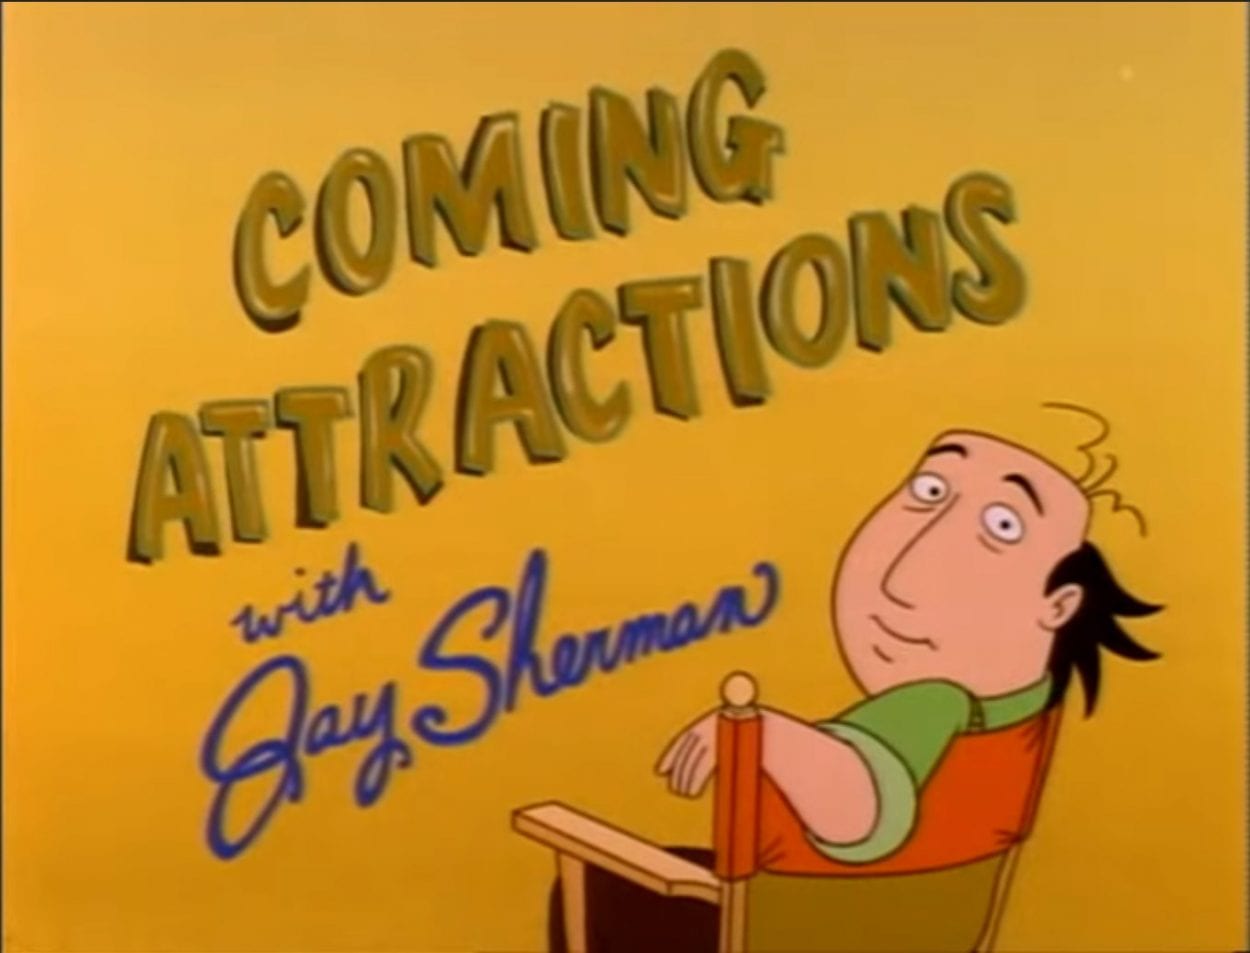 The title card for Jay Sherman's show